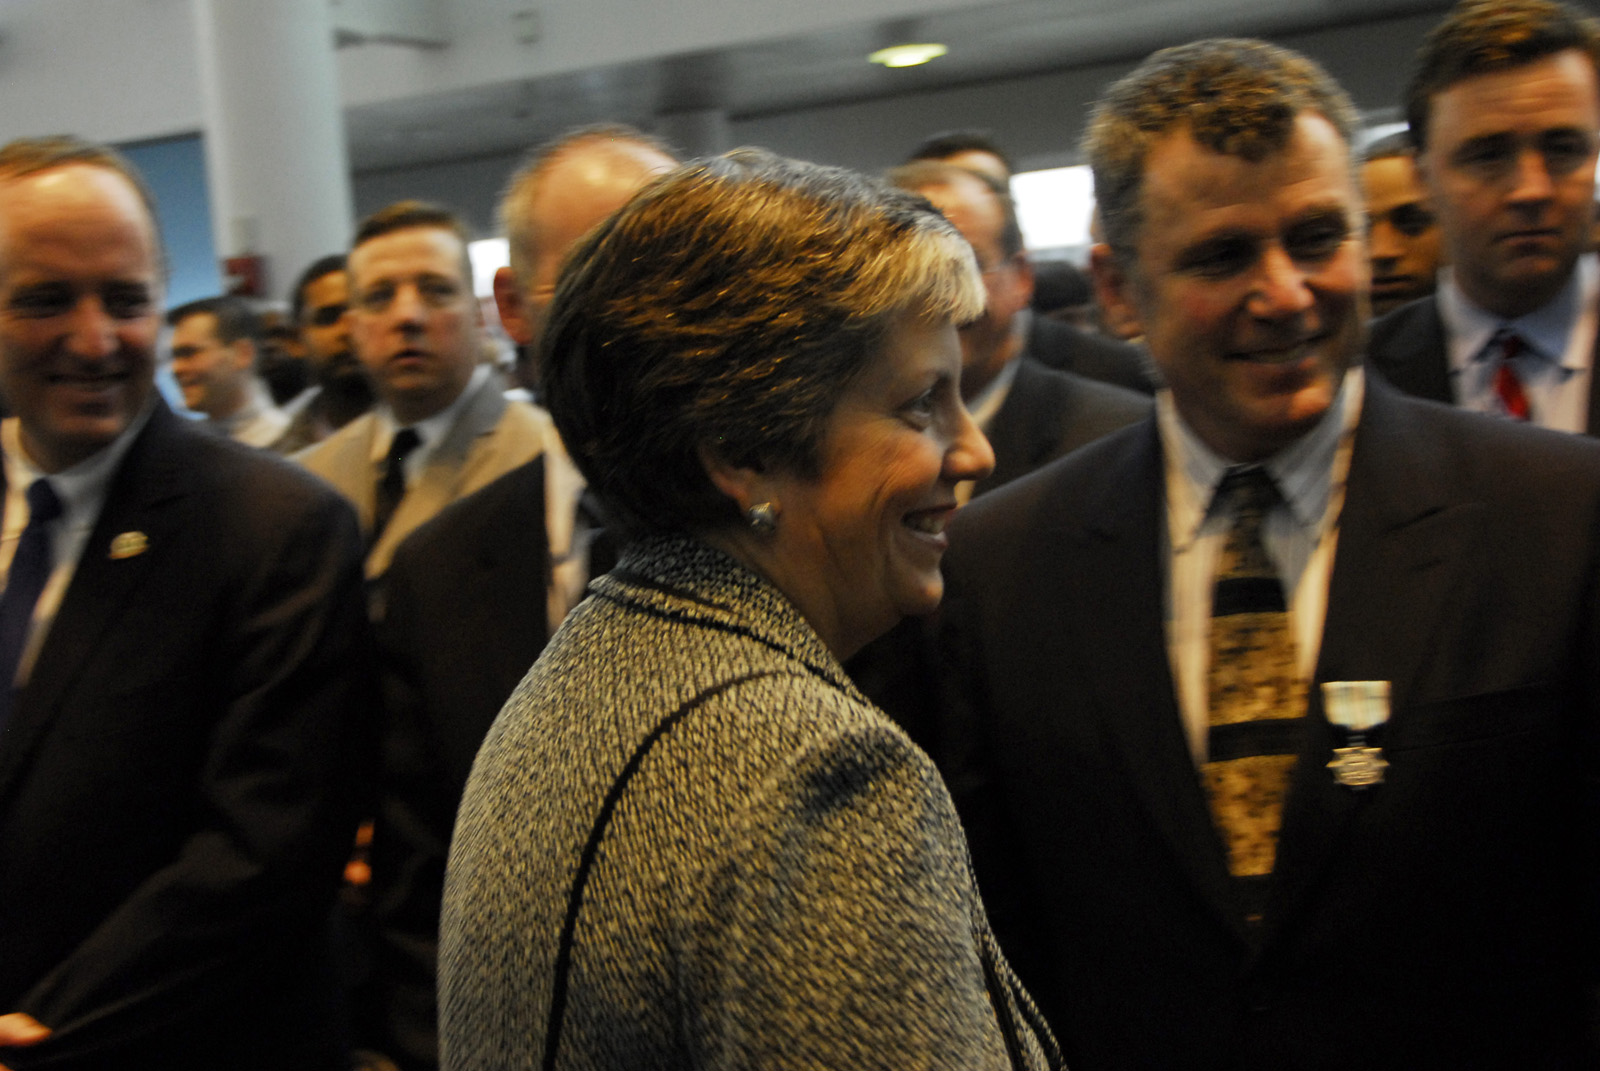 Secretary Napolitano congratulates recipients of Coast Guard public service awards at a ceremony honoring first responders during the US Airways Flight 1549 crash in the Hudson River.